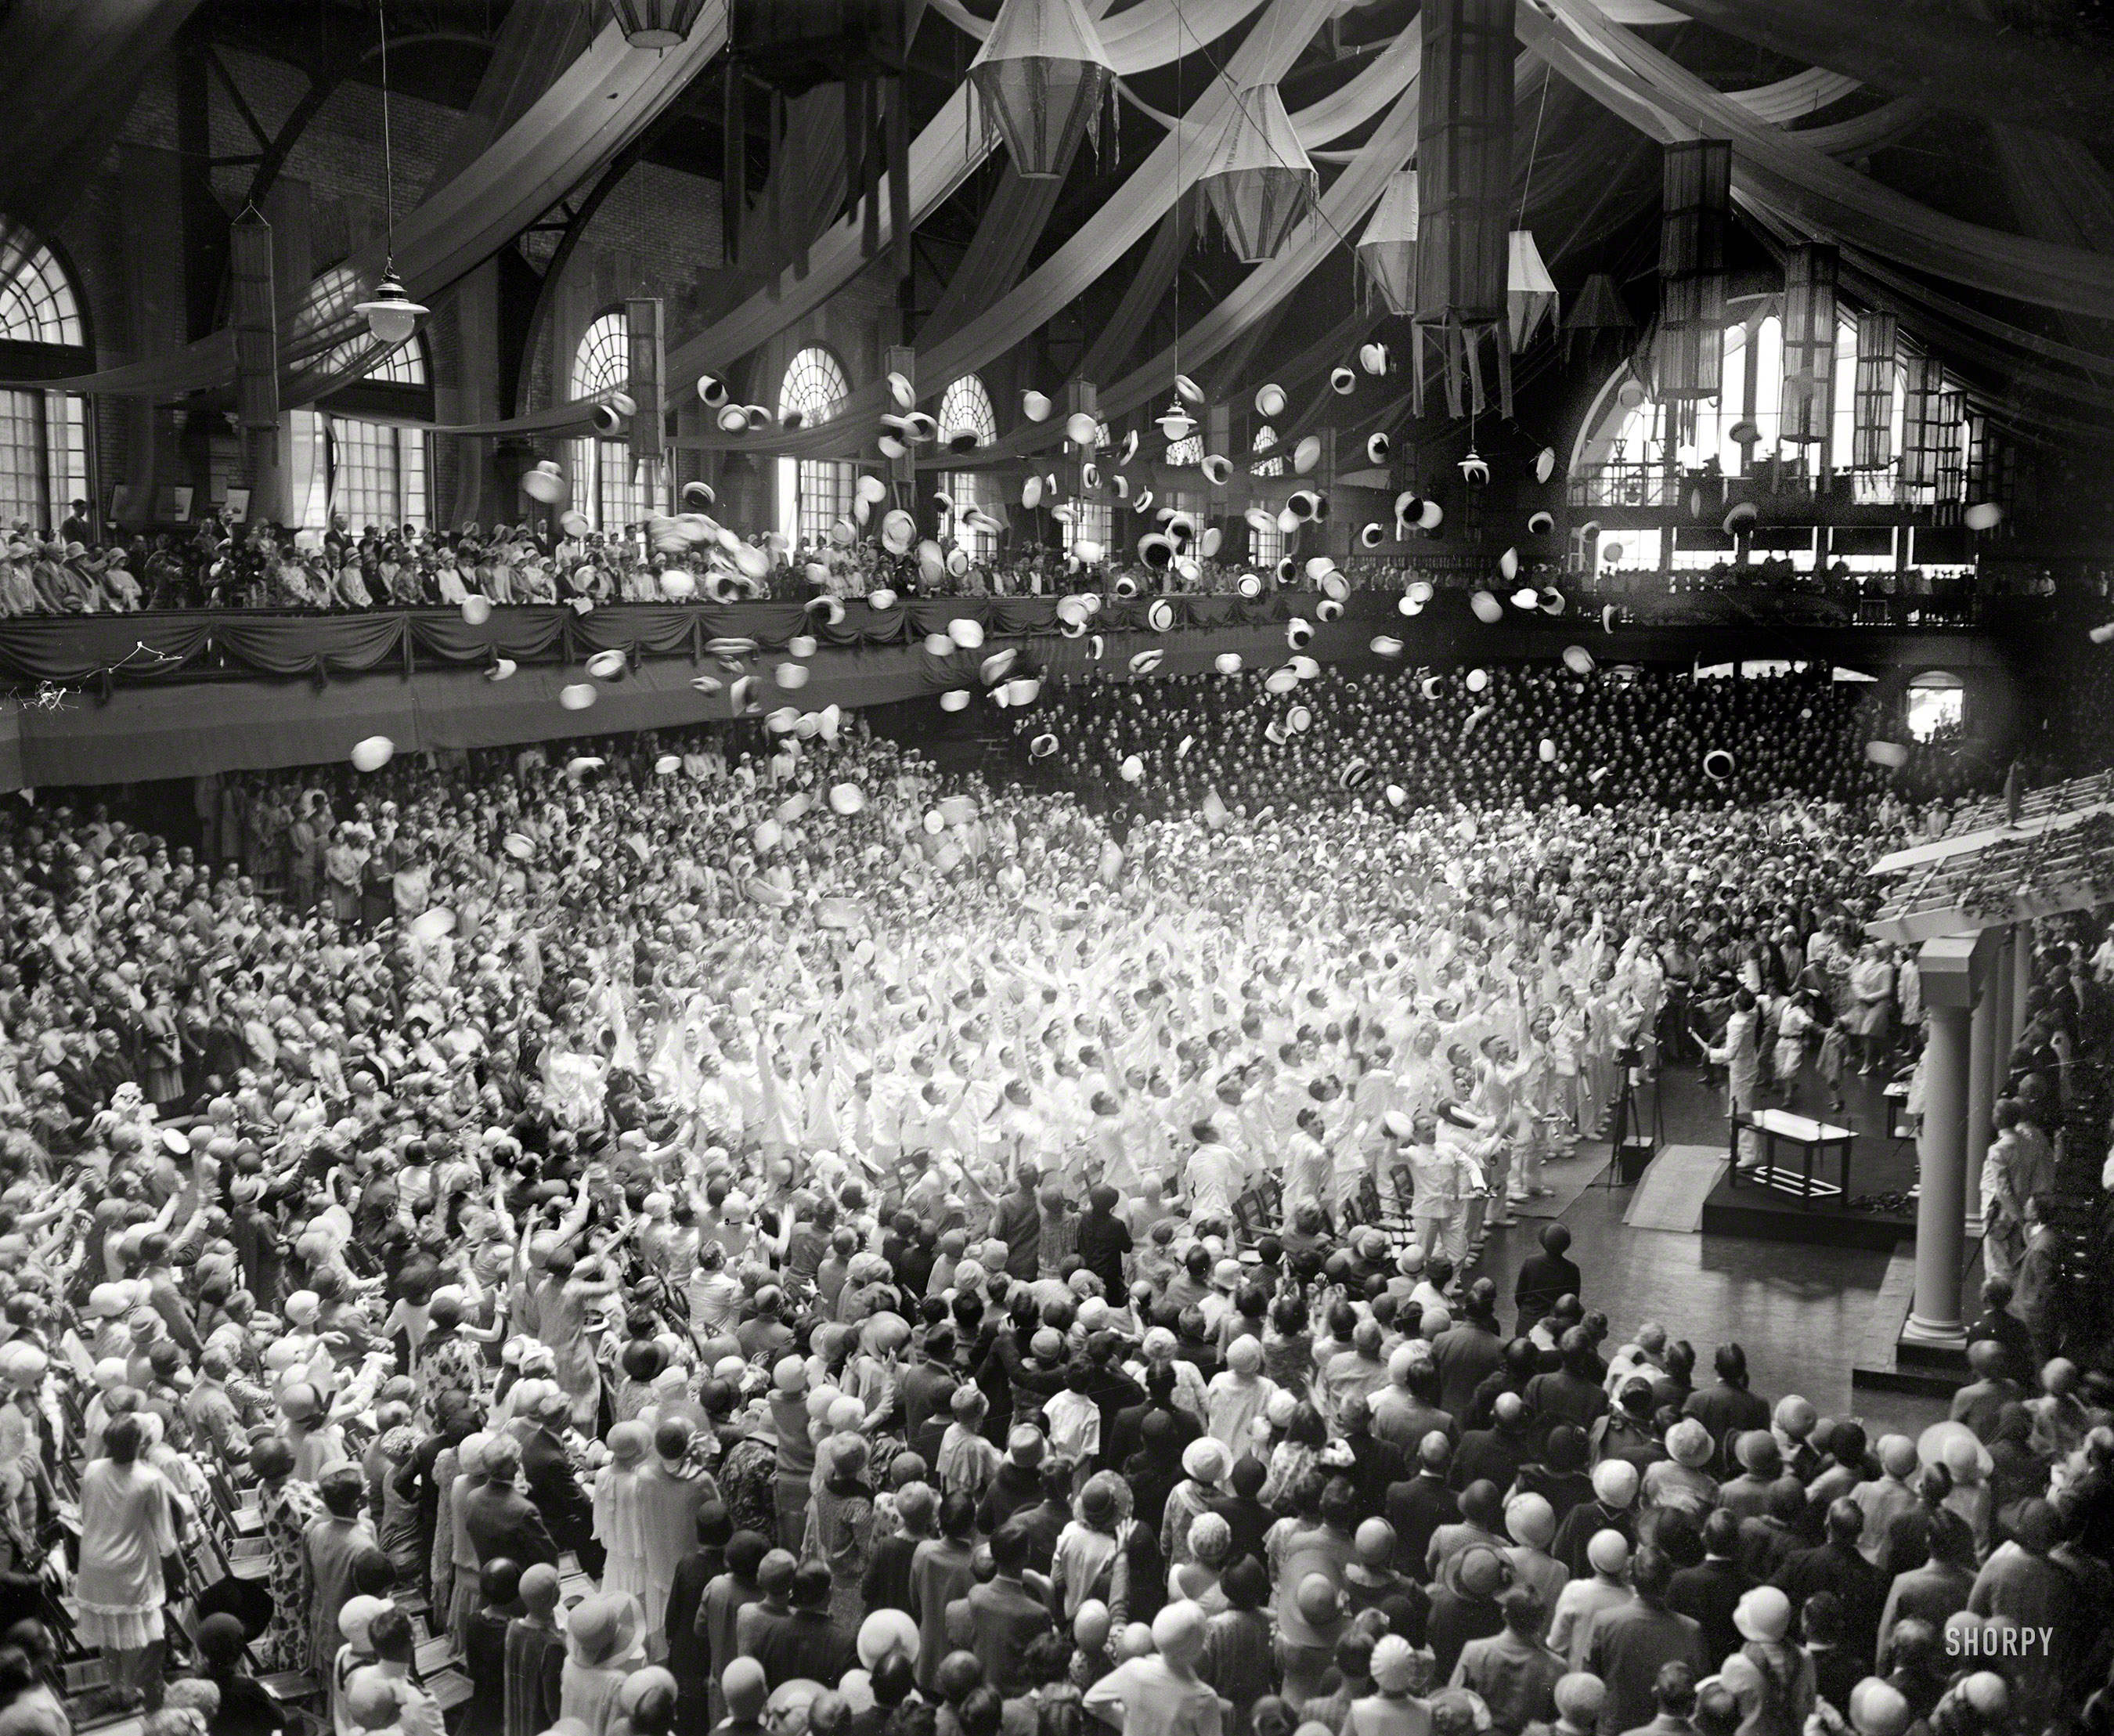 June 6, 1929. Annapolis, Md. "Graduation, U.S. Naval Academy." Midshipmen doing the traditional cap-toss. Harris & Ewing glass negative. View full size.